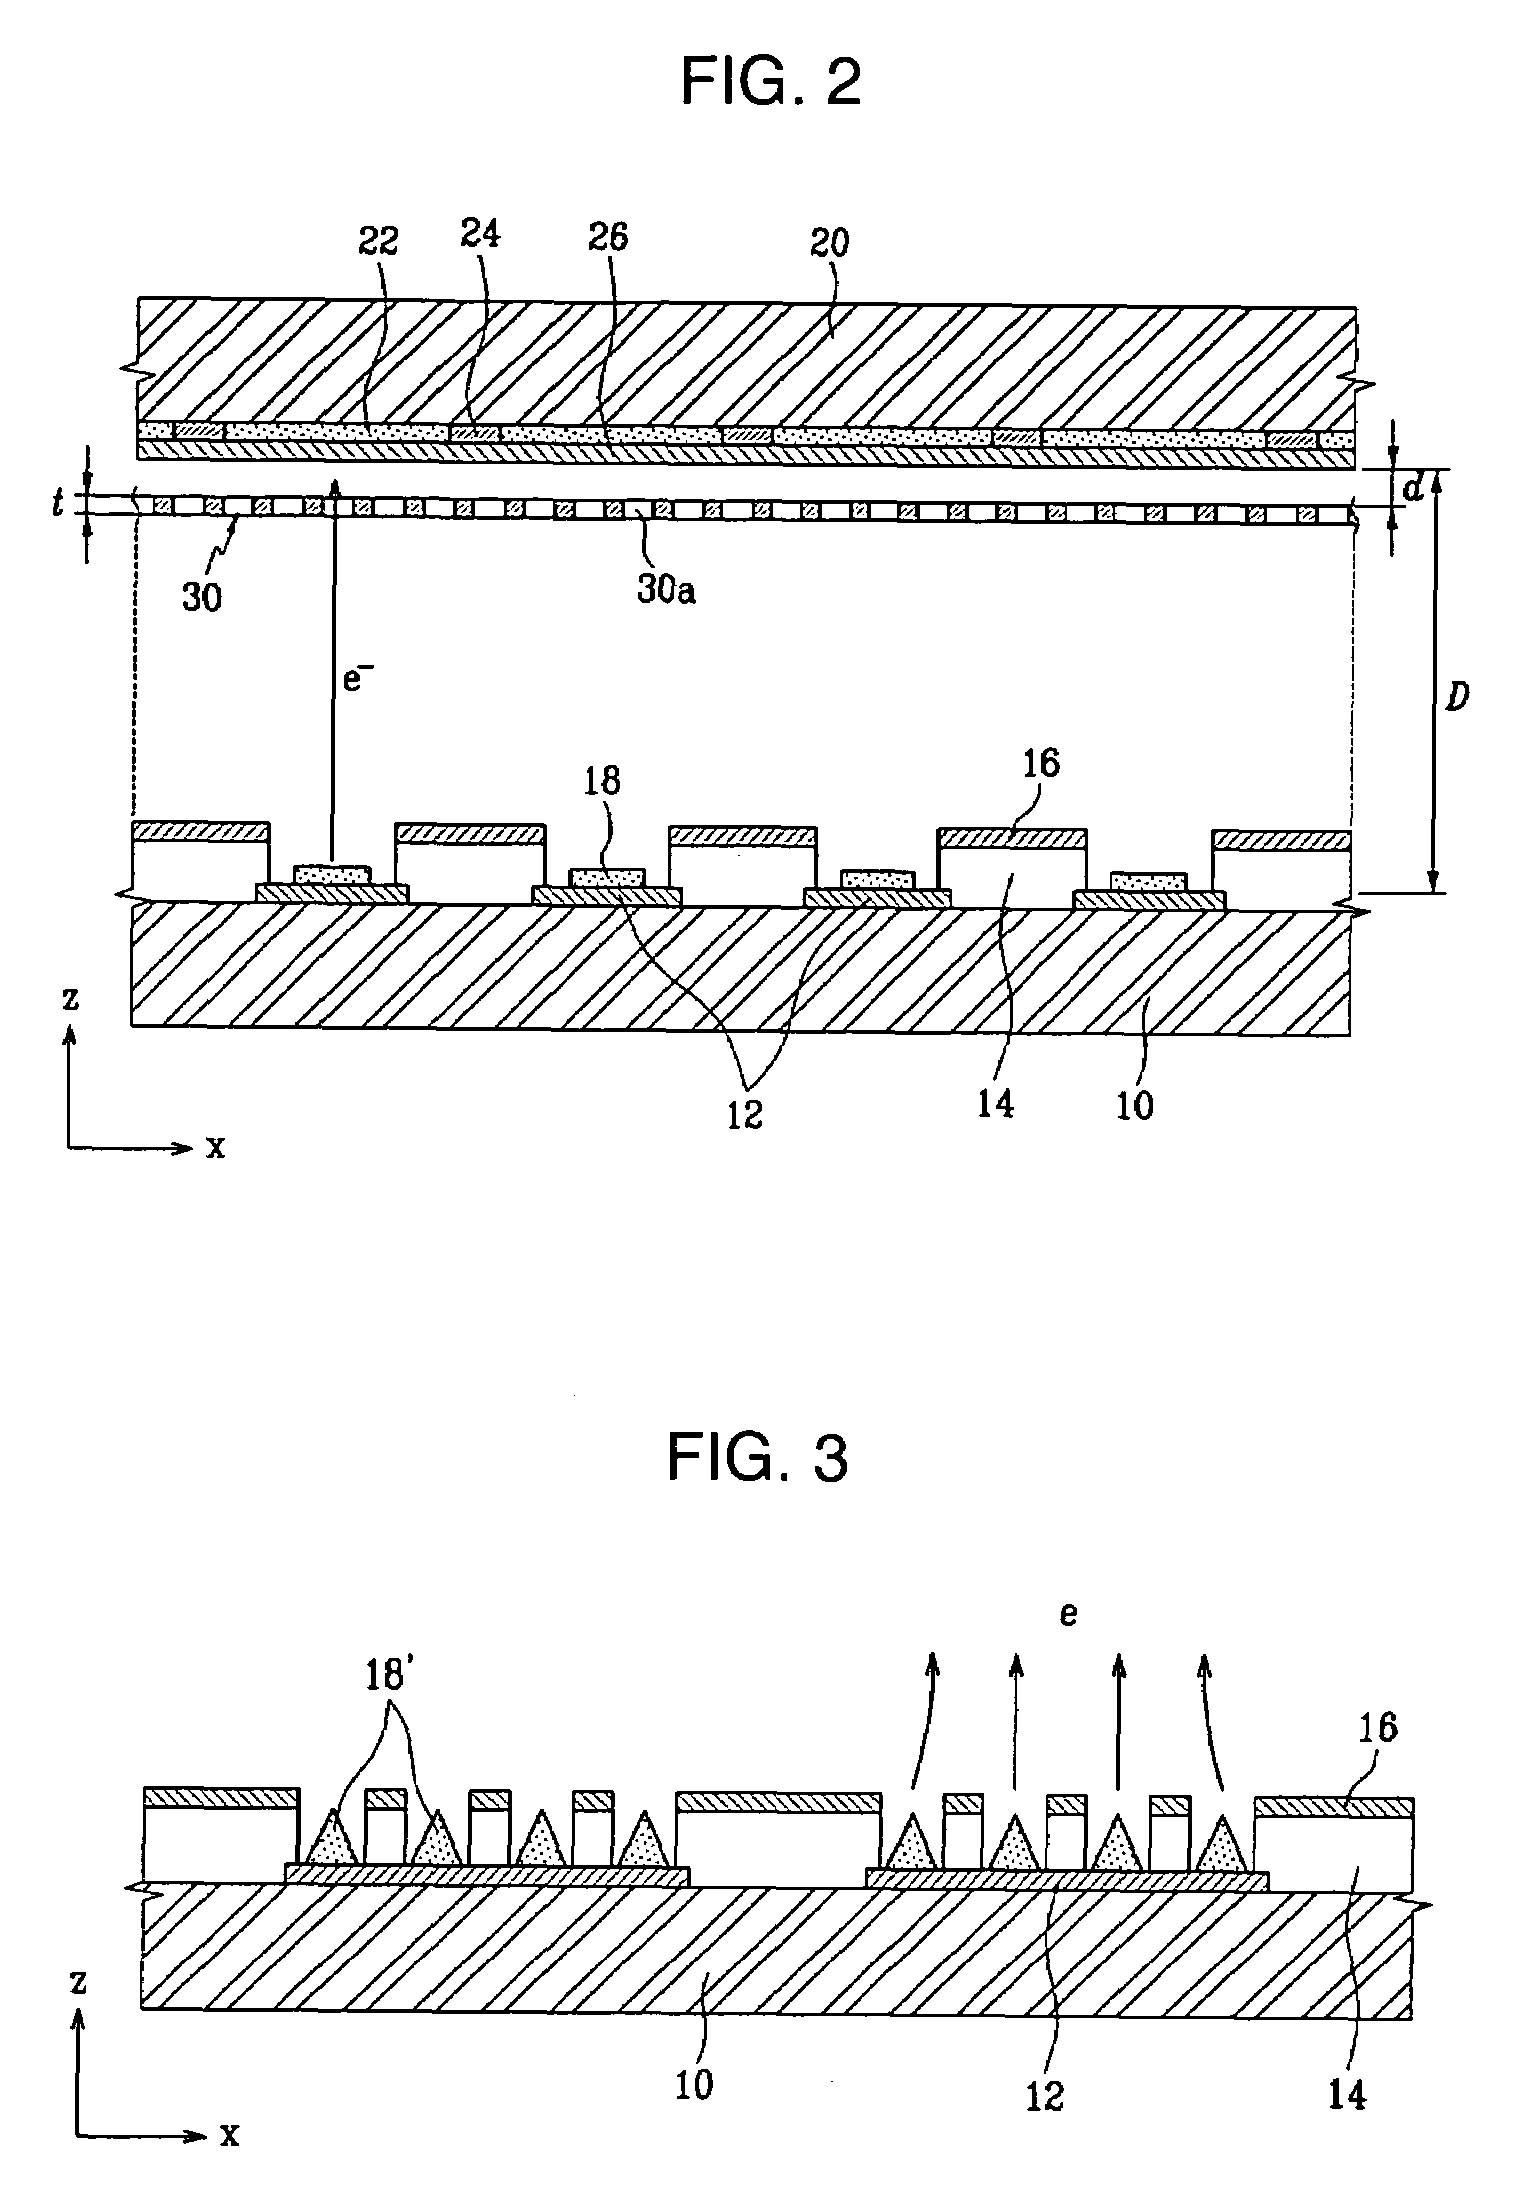 Electron emission device with a grid electrode for focusing electron beams